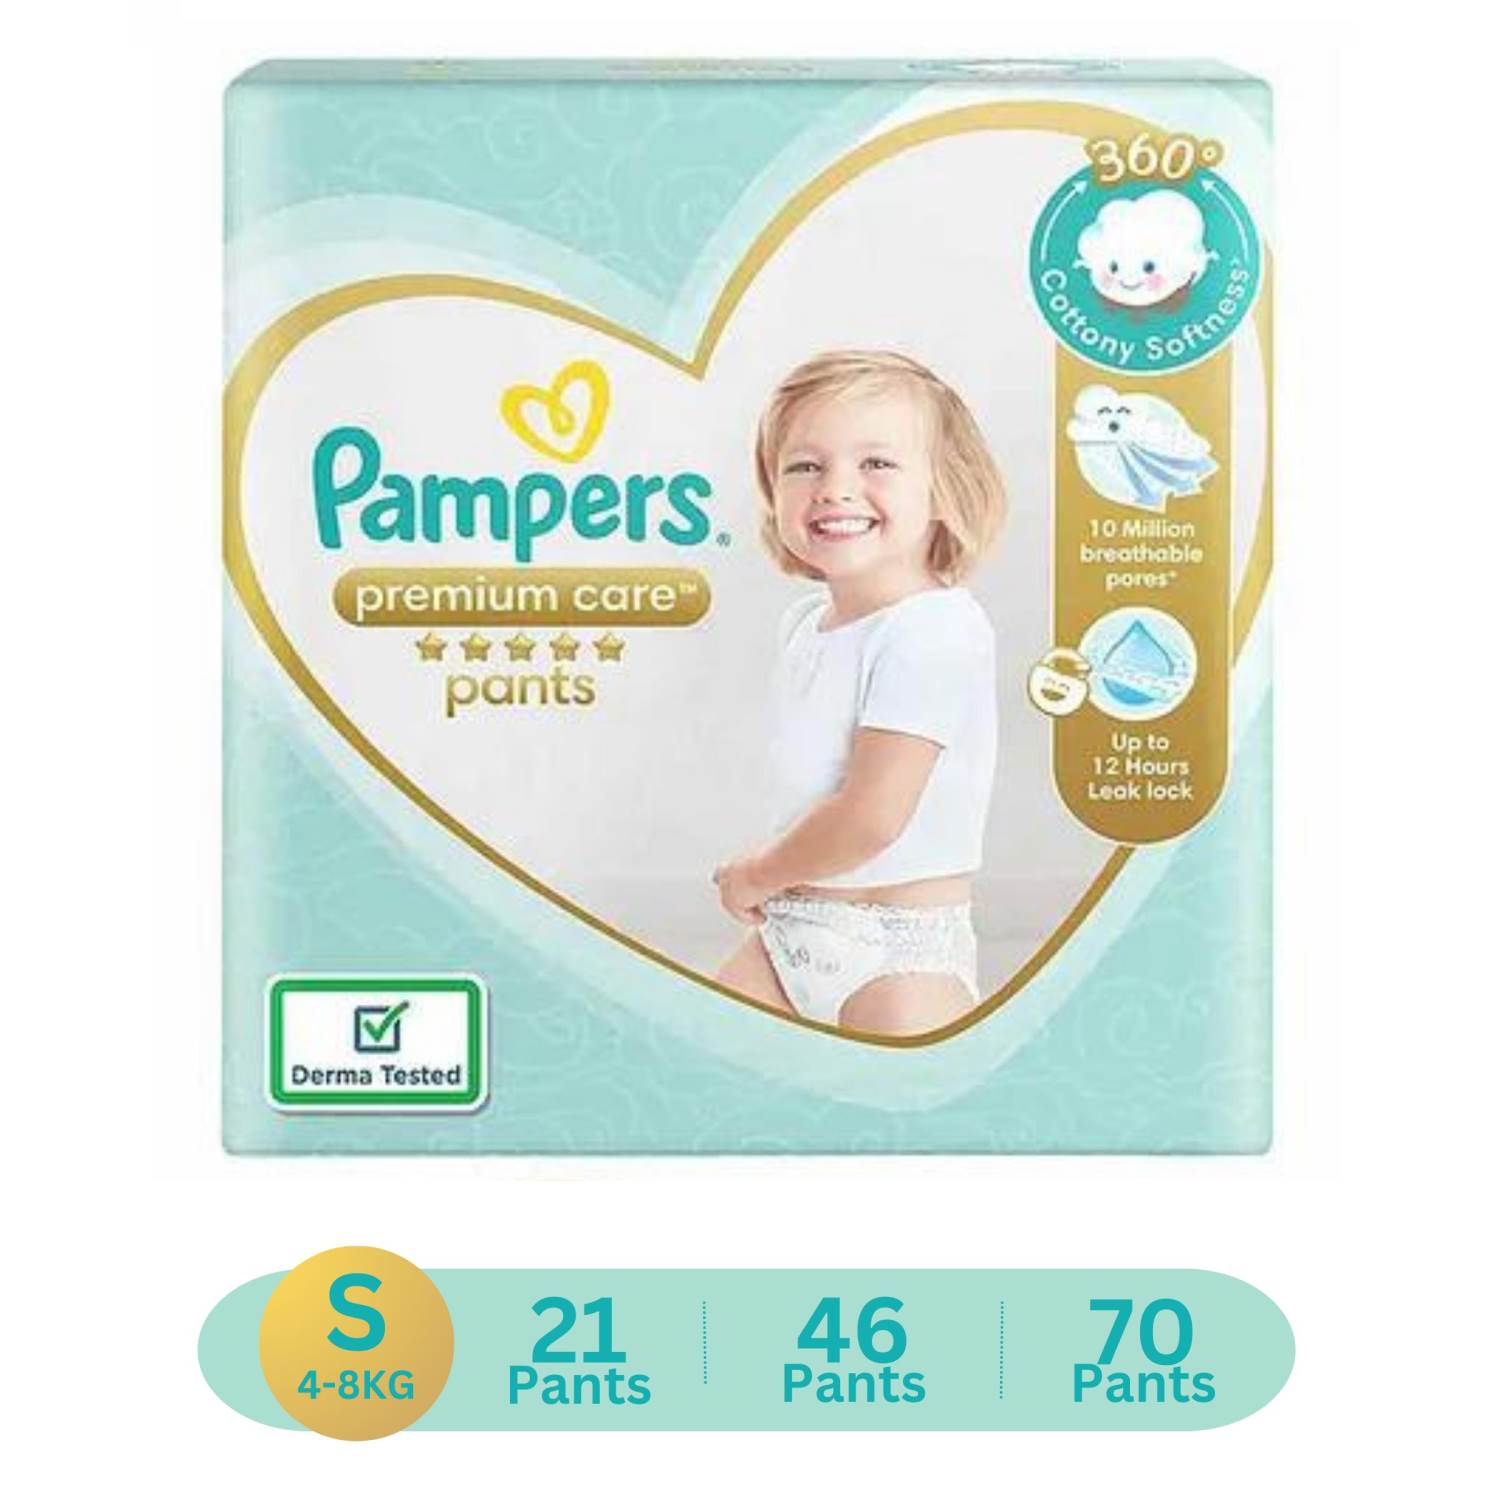 Barry Verfrissend Observatorium Pampers Premium Care Pants, Small size baby diapers (SM) Softest ever  Pampers pants :: SMILE BABY